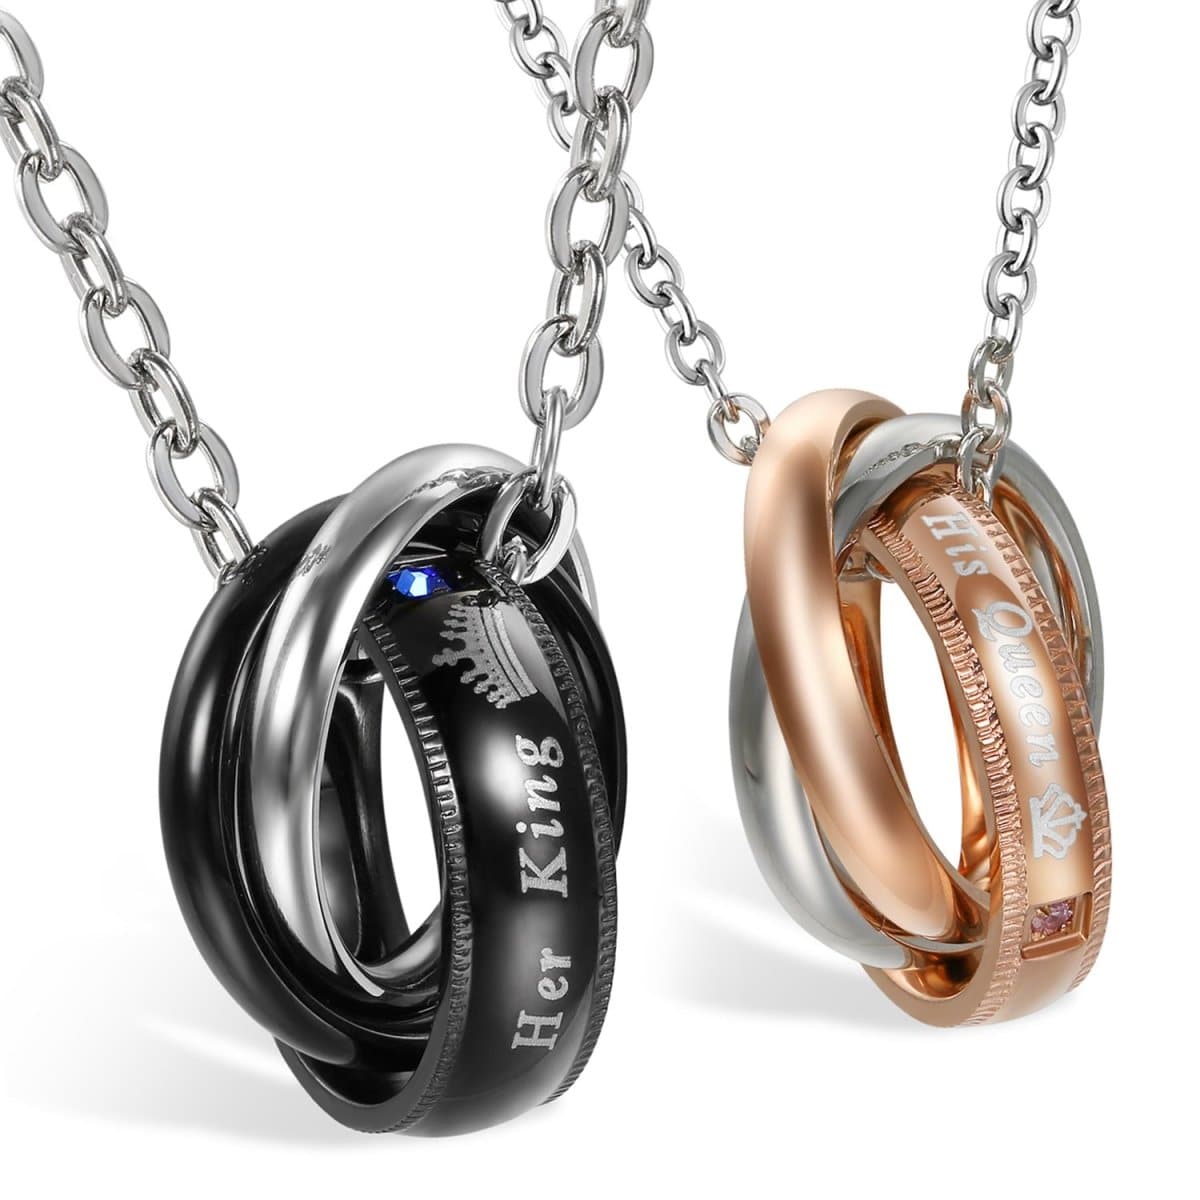 Matching Necklaces with King and Queen Couples Rings